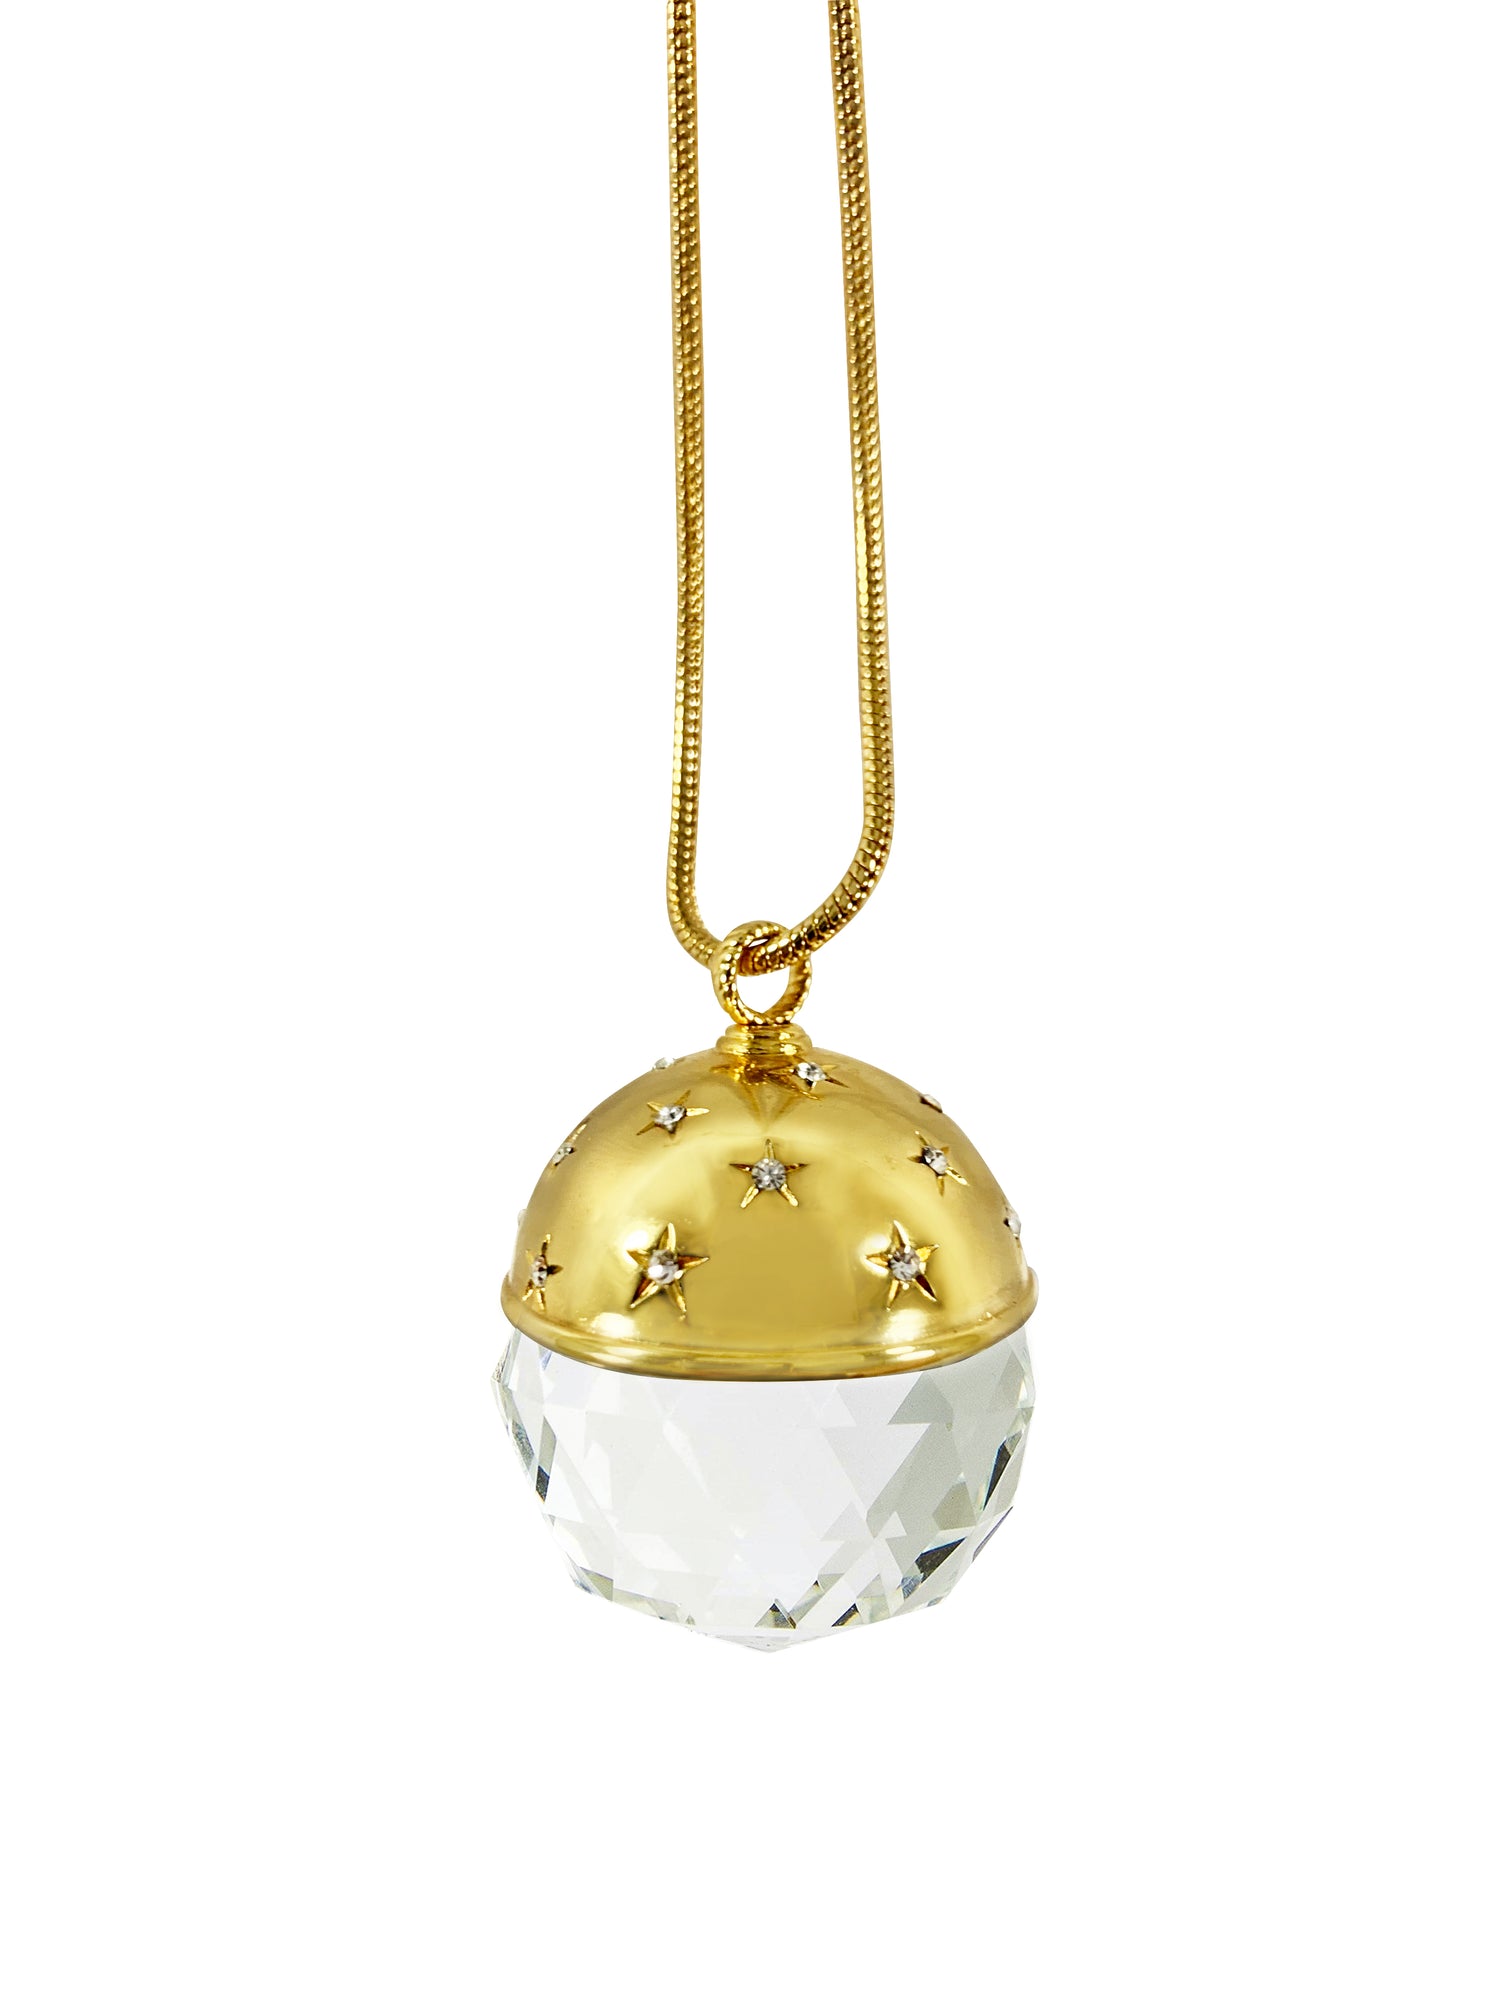 Cristal Ball Necklace